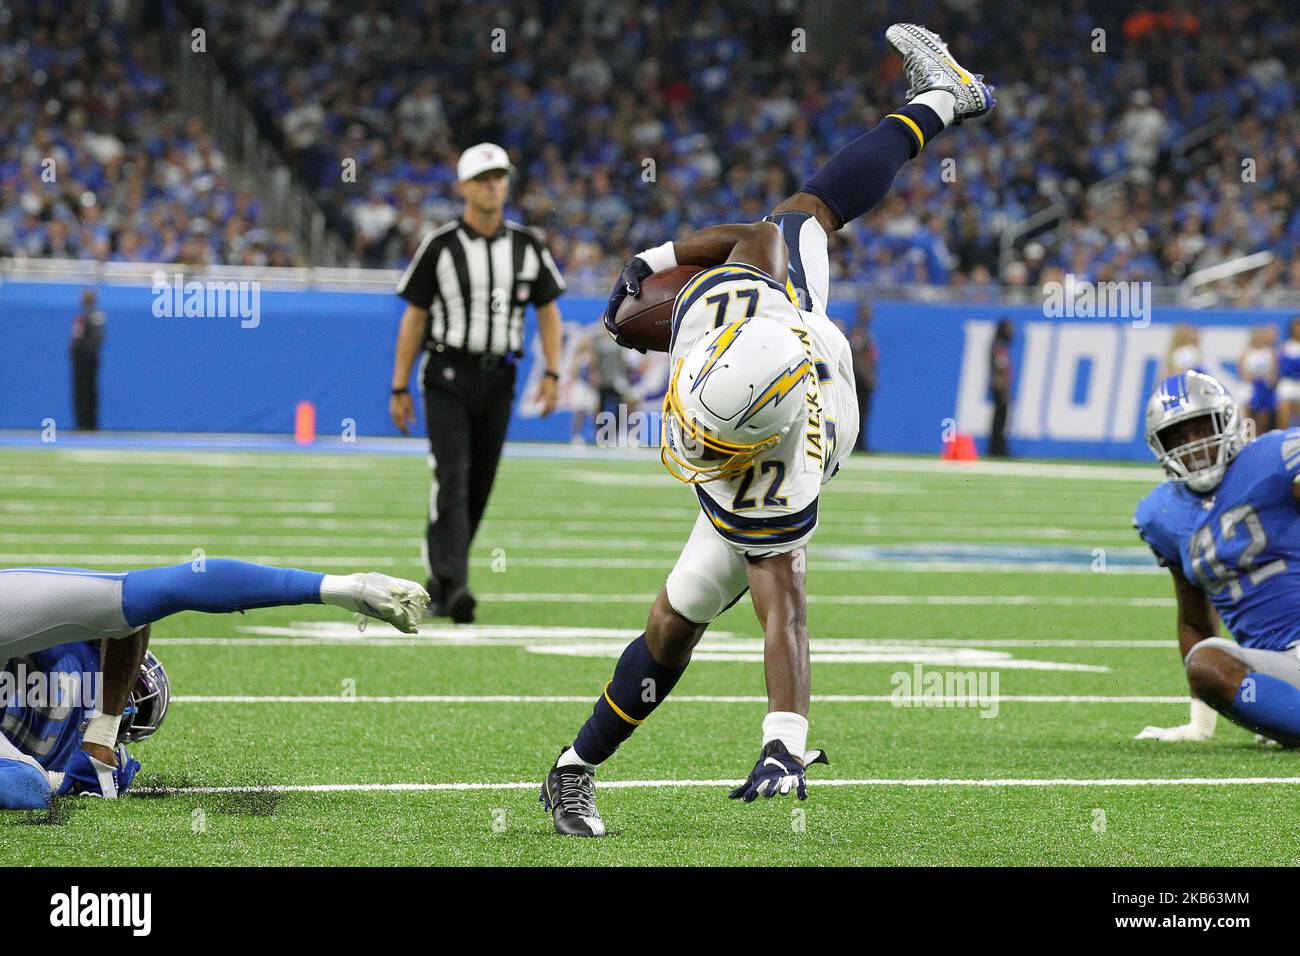 Los Angeles Chargers running back Justin Jackson (22) runs the ball against Detroit Lions defensive back Tracy Walker (21) during the second half of an NFL football game in Detroit, Michigan USA, on Sunday, September 15, 2019 (Photo by Jorge Lemus/NurPhoto) Stock Photo